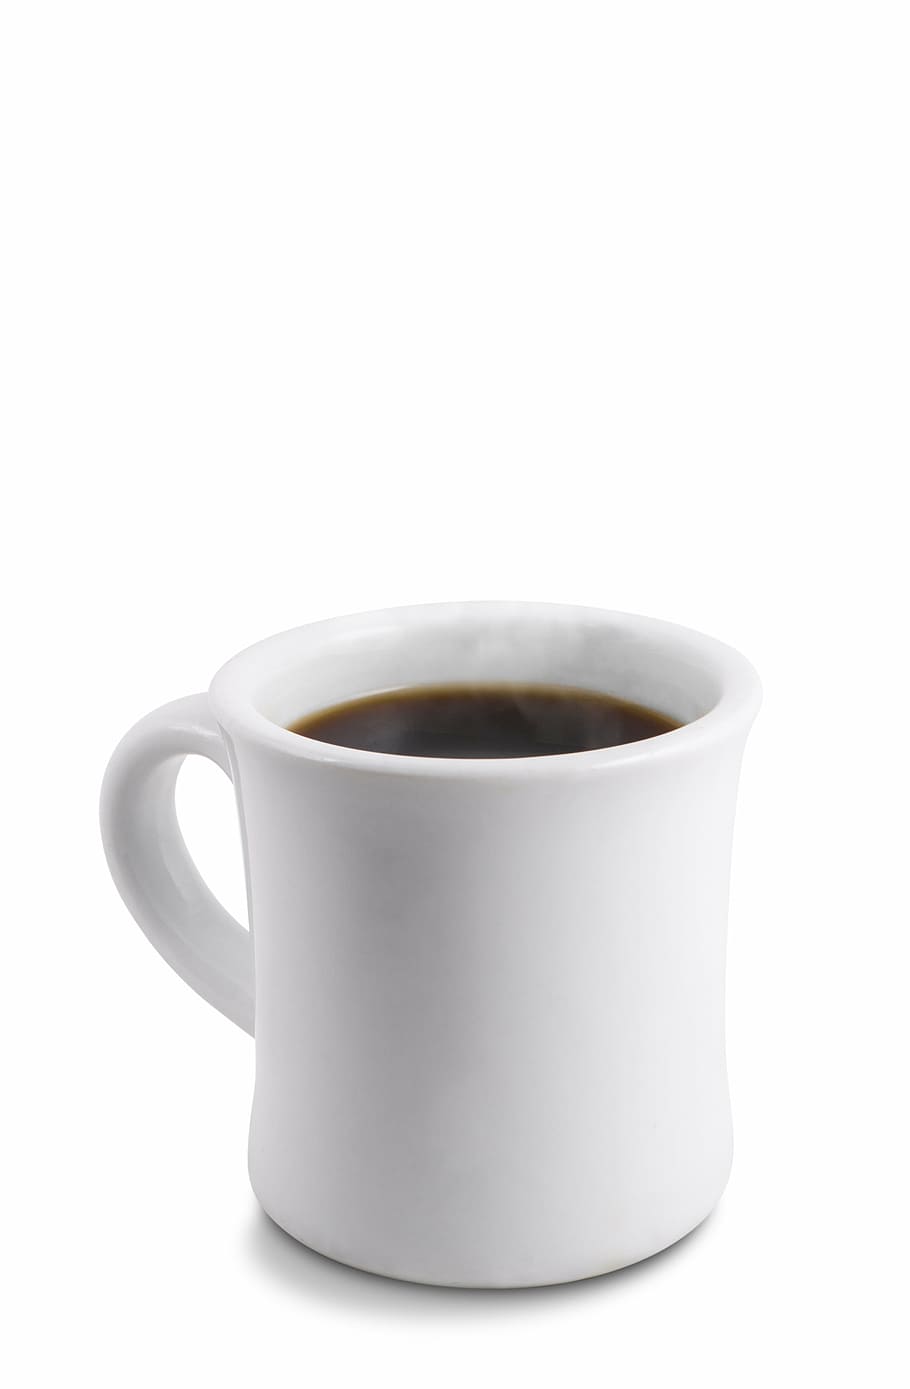 drink, cup, cafe, hot, white background, mug, studio shot, refreshment, food and drink, coffee cup